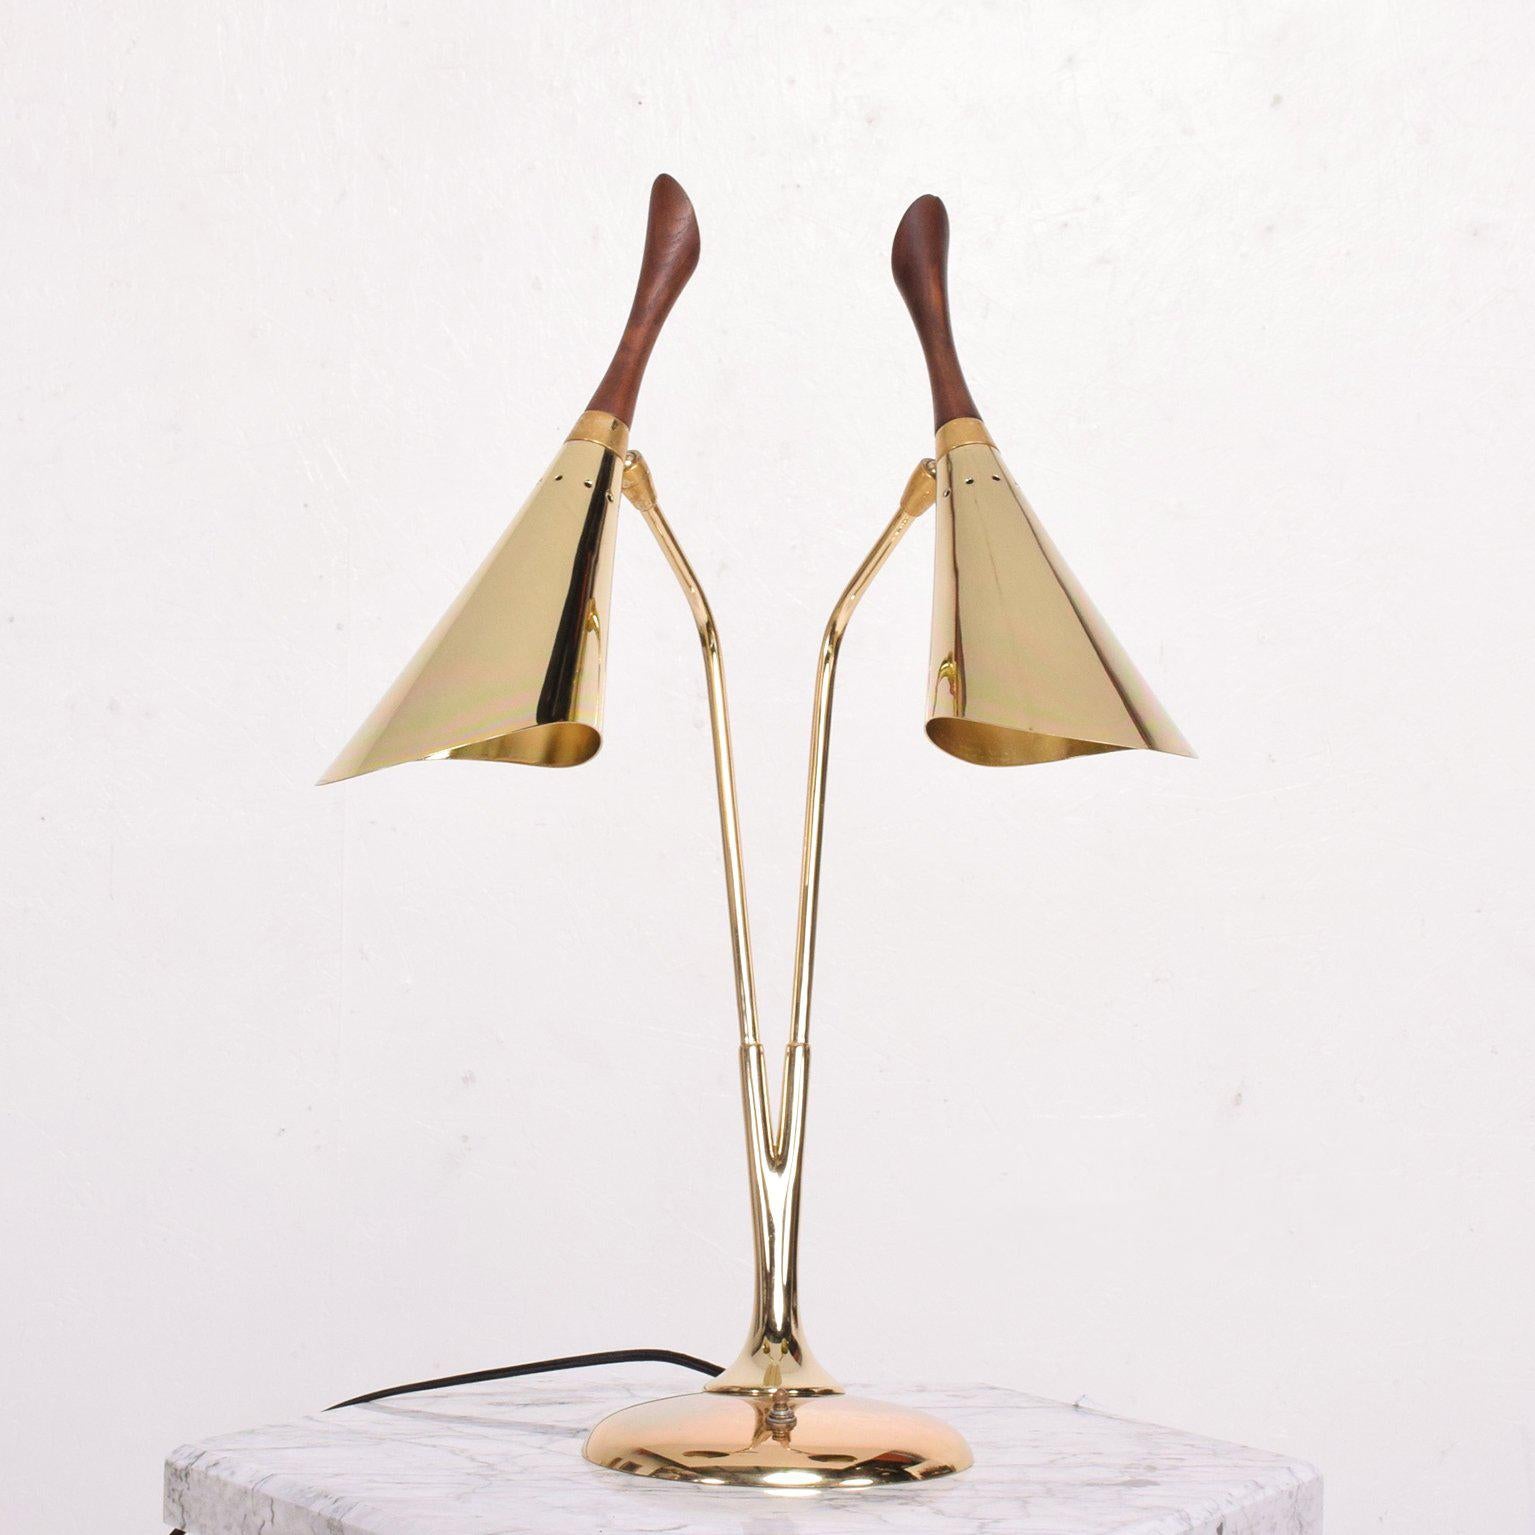 For your consideration a Mid-Century Modern table or desk lamp with double shade. 

Unusual double cone with beautiful sculptural shape. 

Excellent condition. Rewired. 

New brass plated finish with walnut inserts in top. Electrical cord in